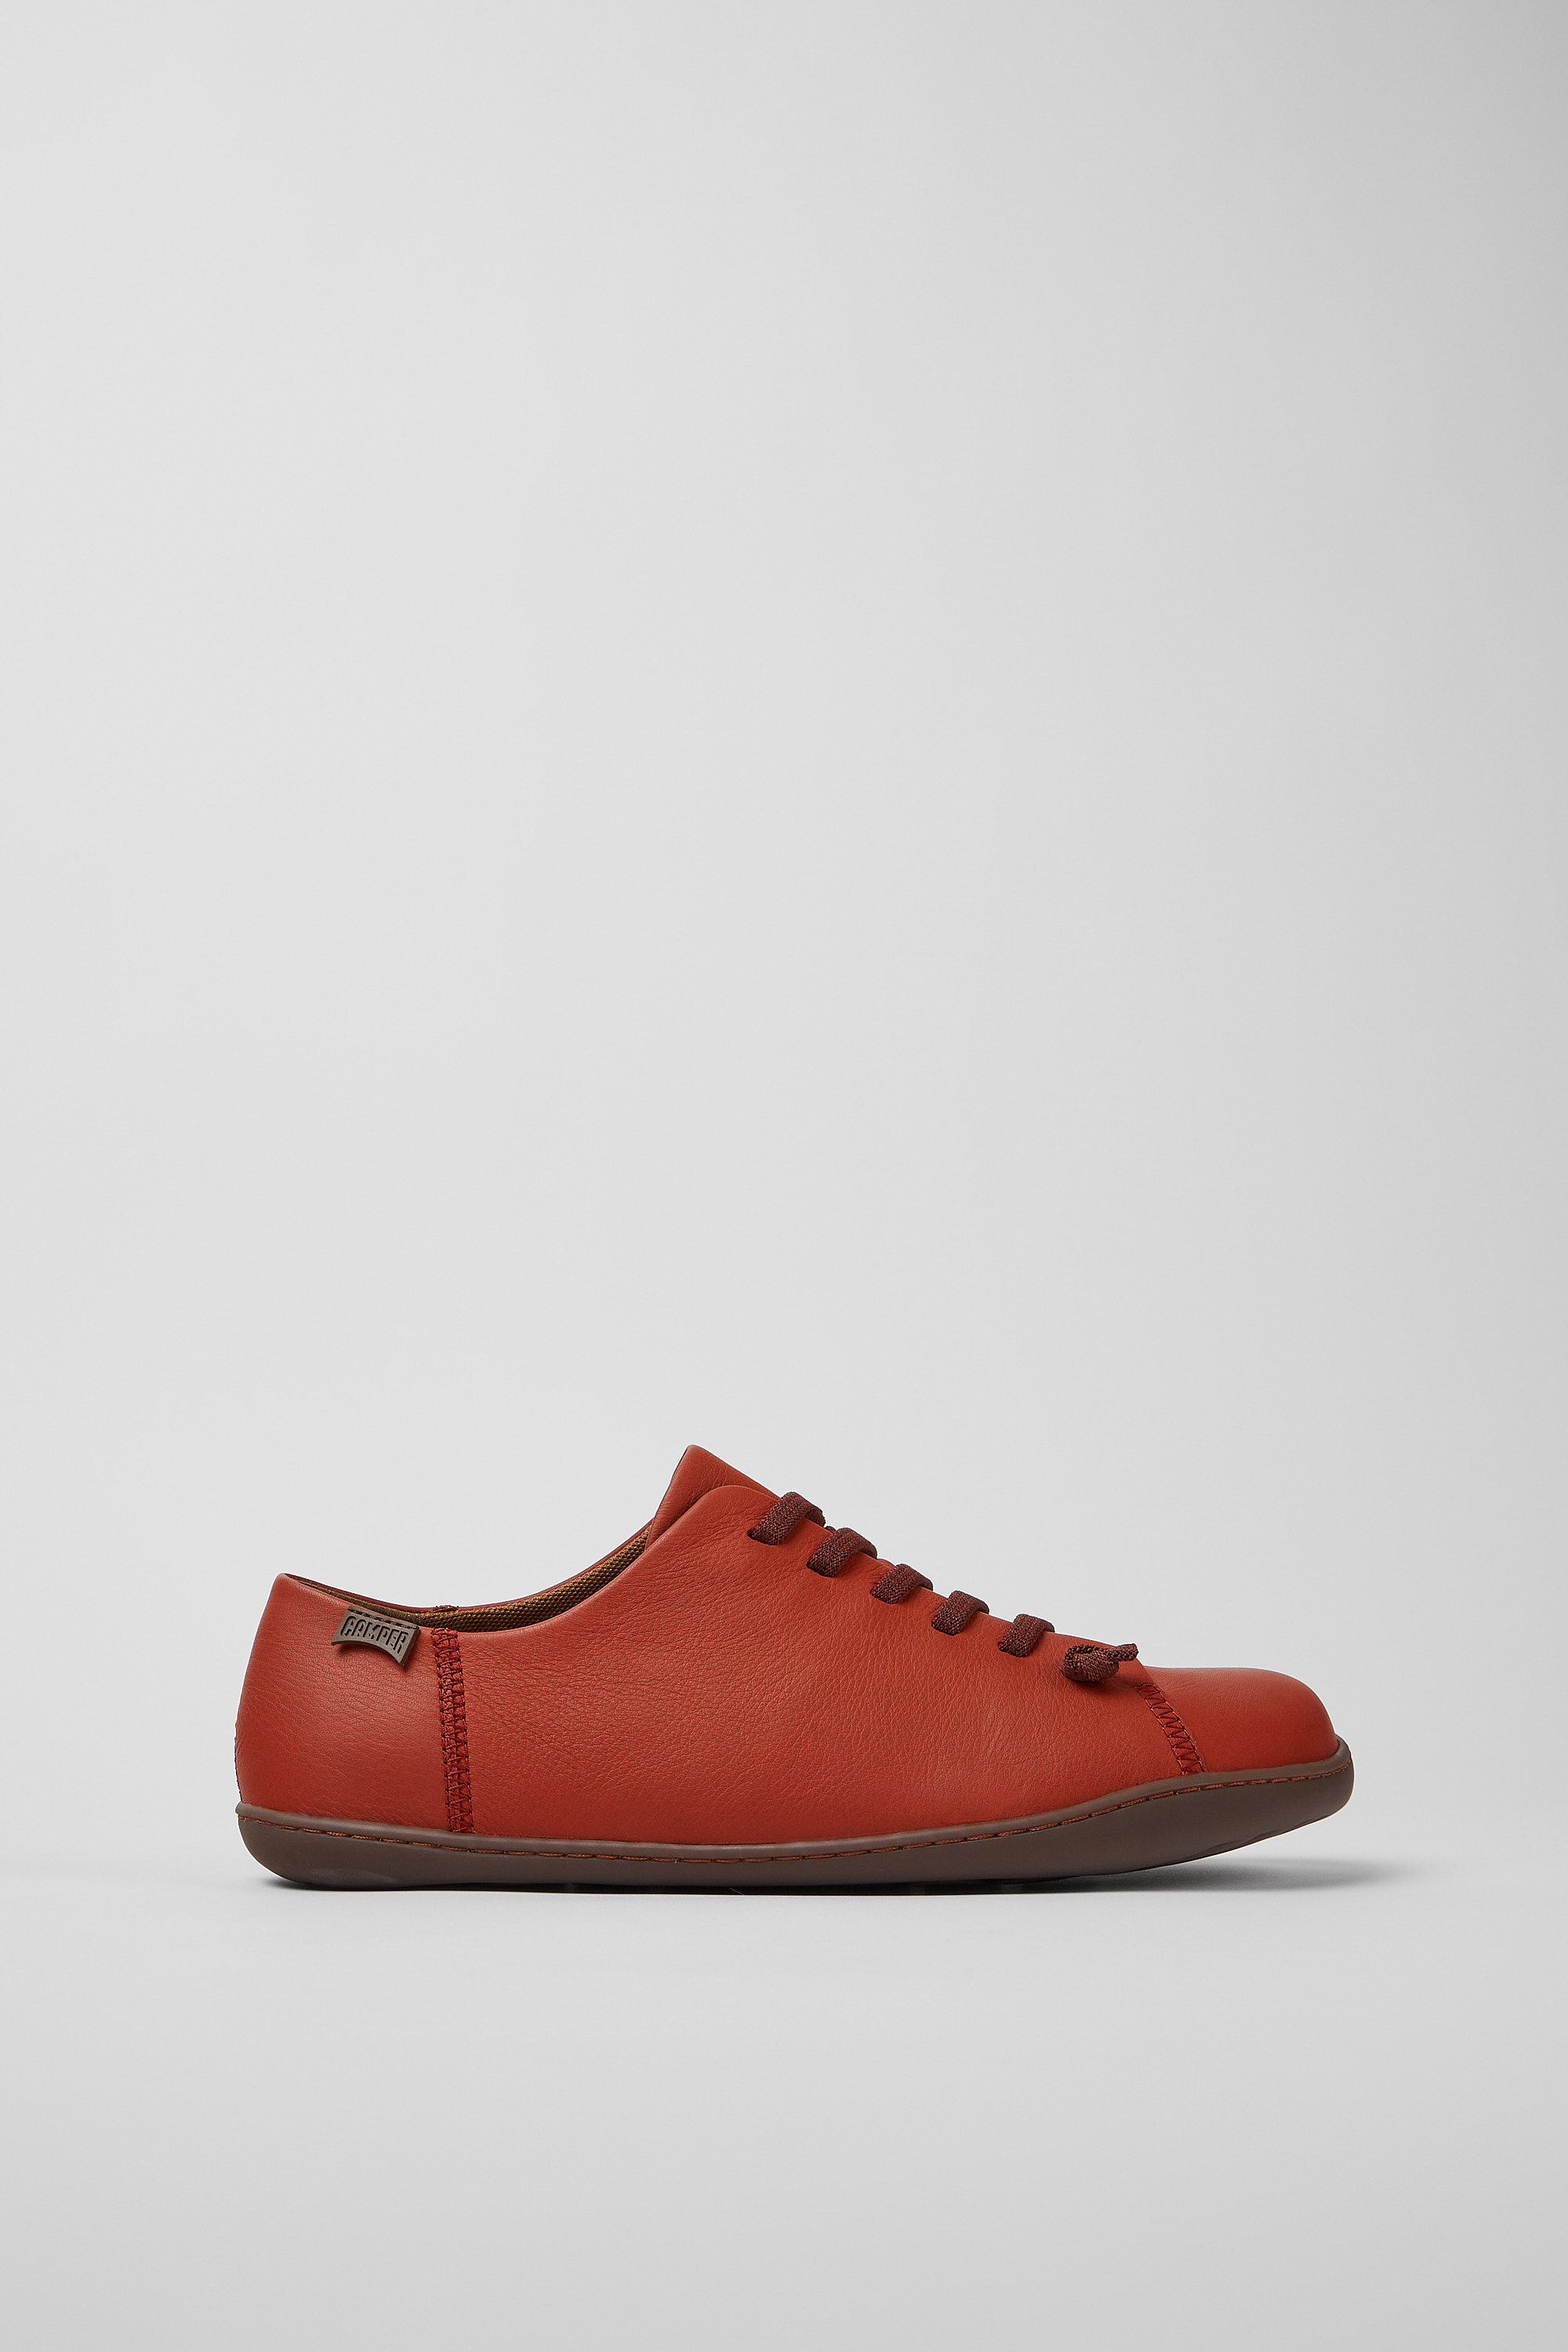 Peu Red Lace-Up for Men - Fall/Winter collection - Camper USA